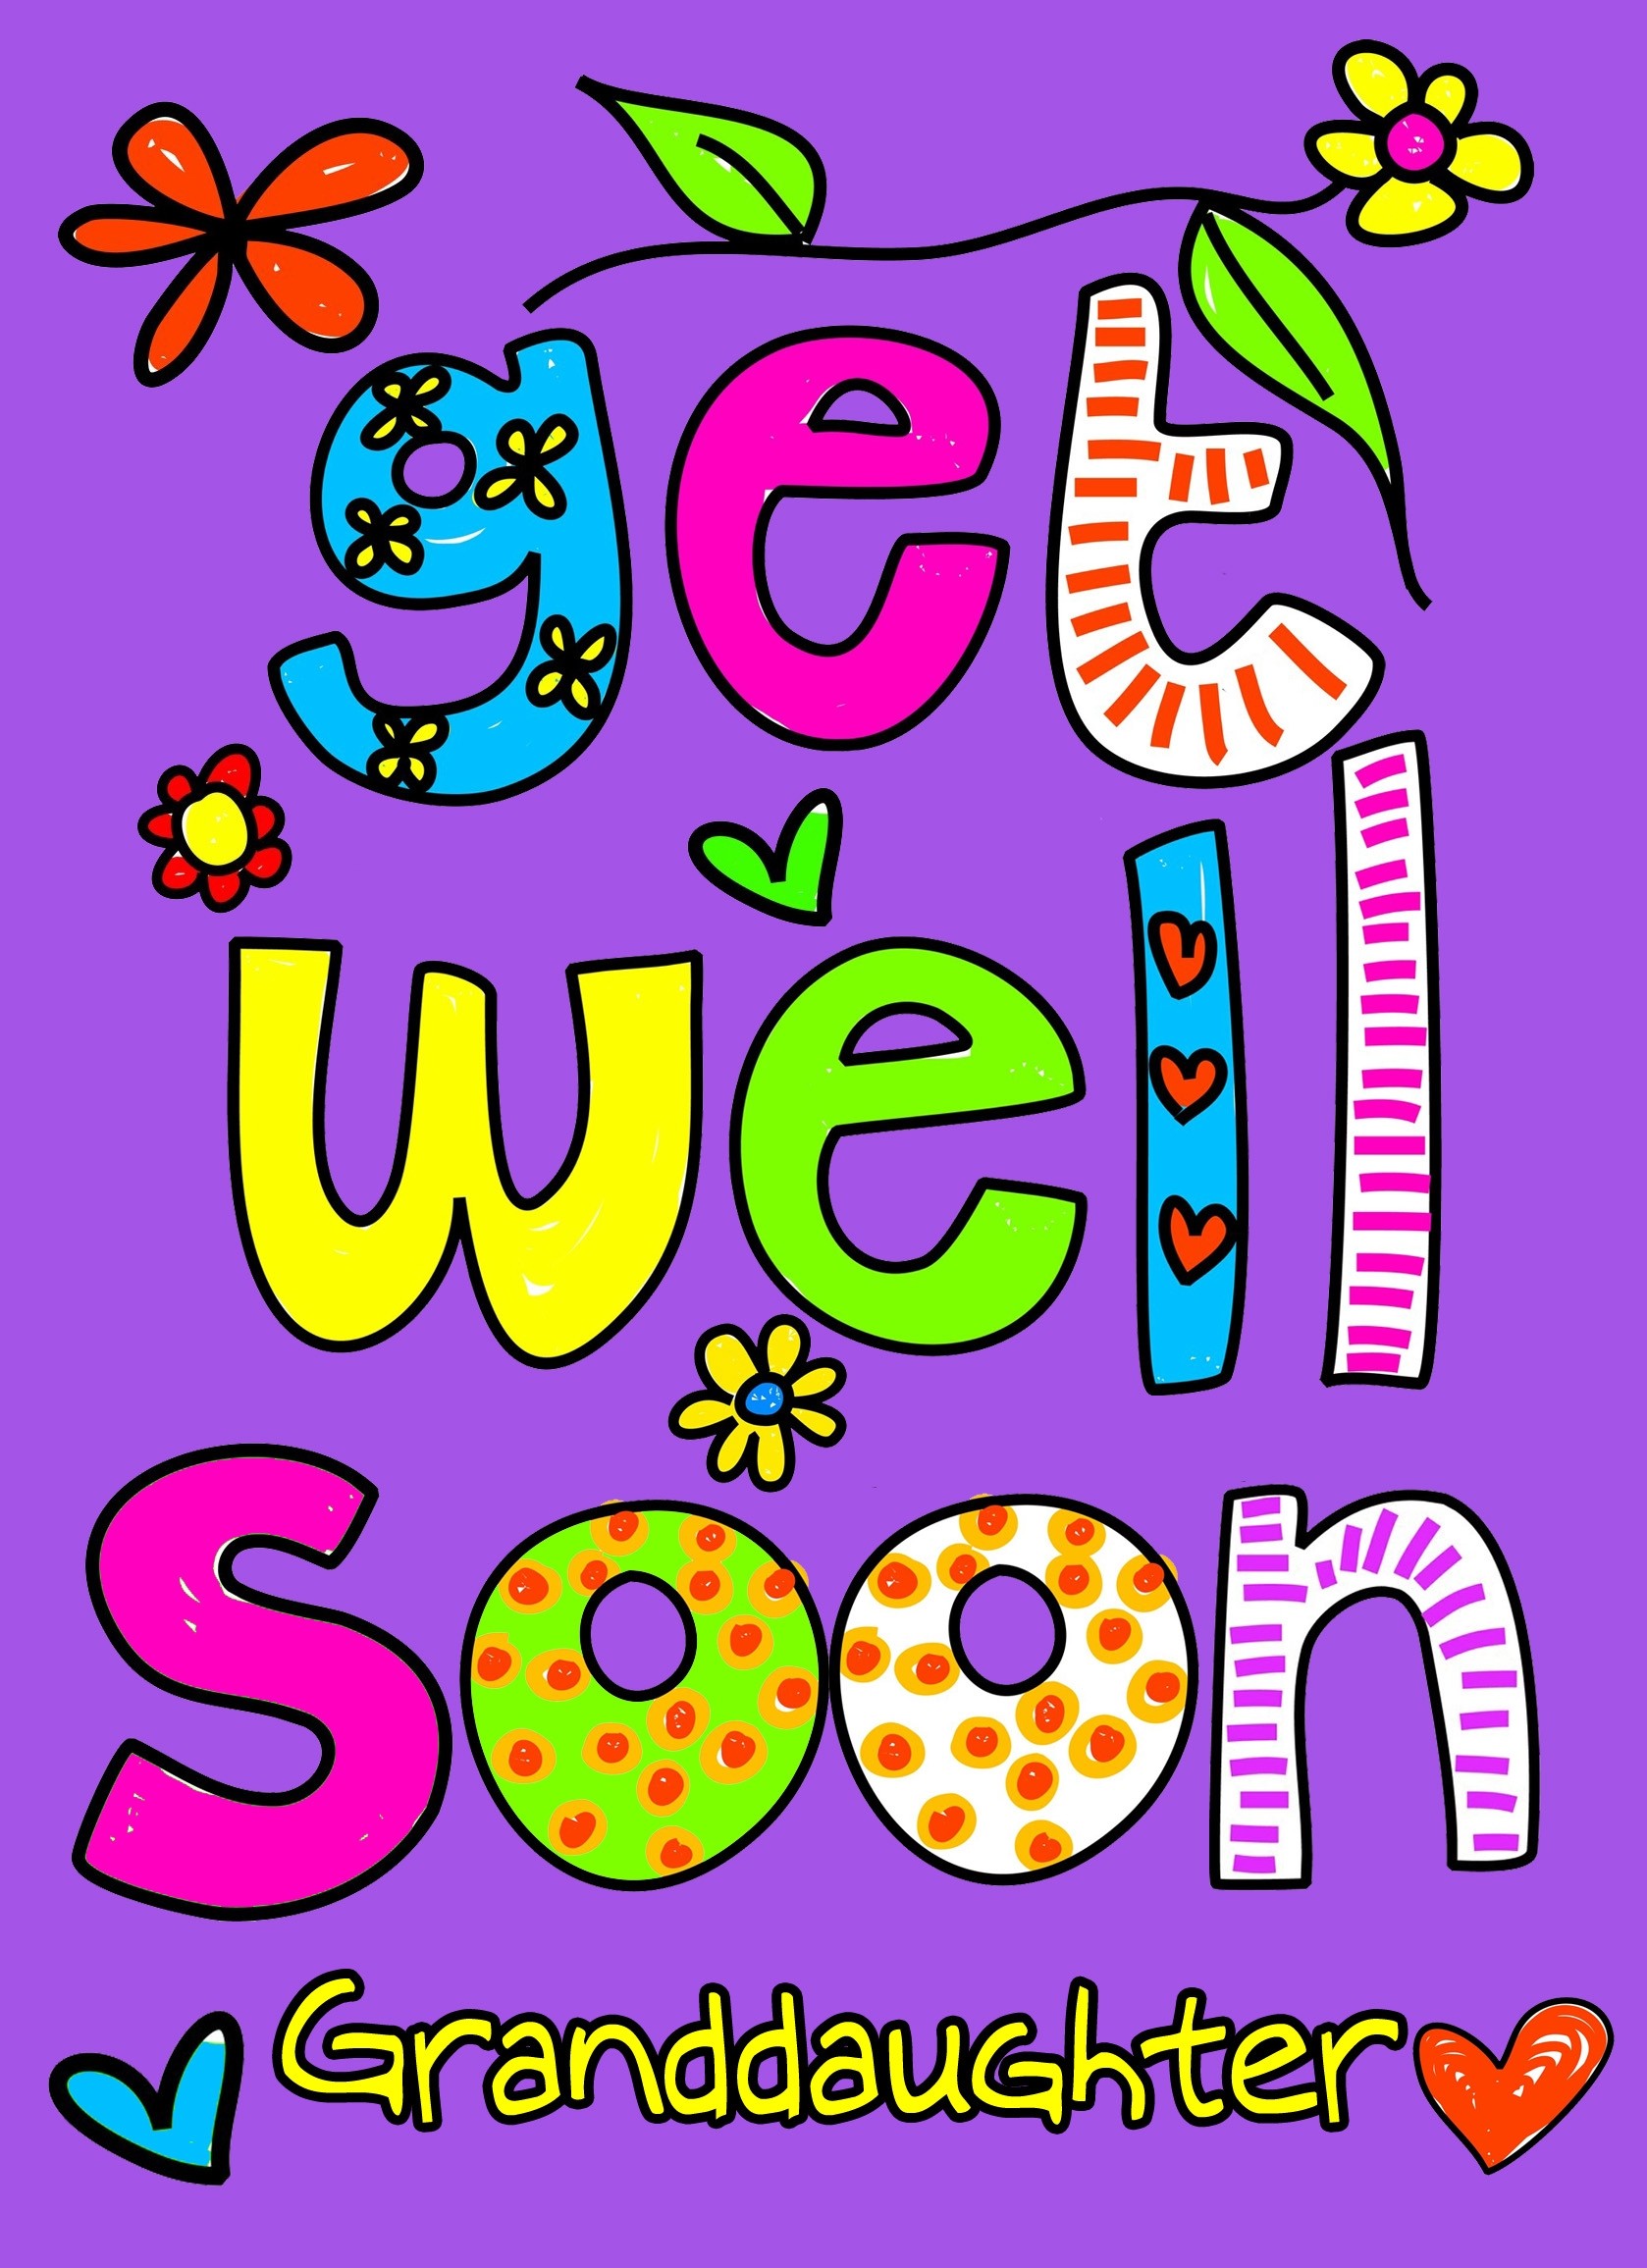 Get Well Soon 'Granddaughter' Greeting Card